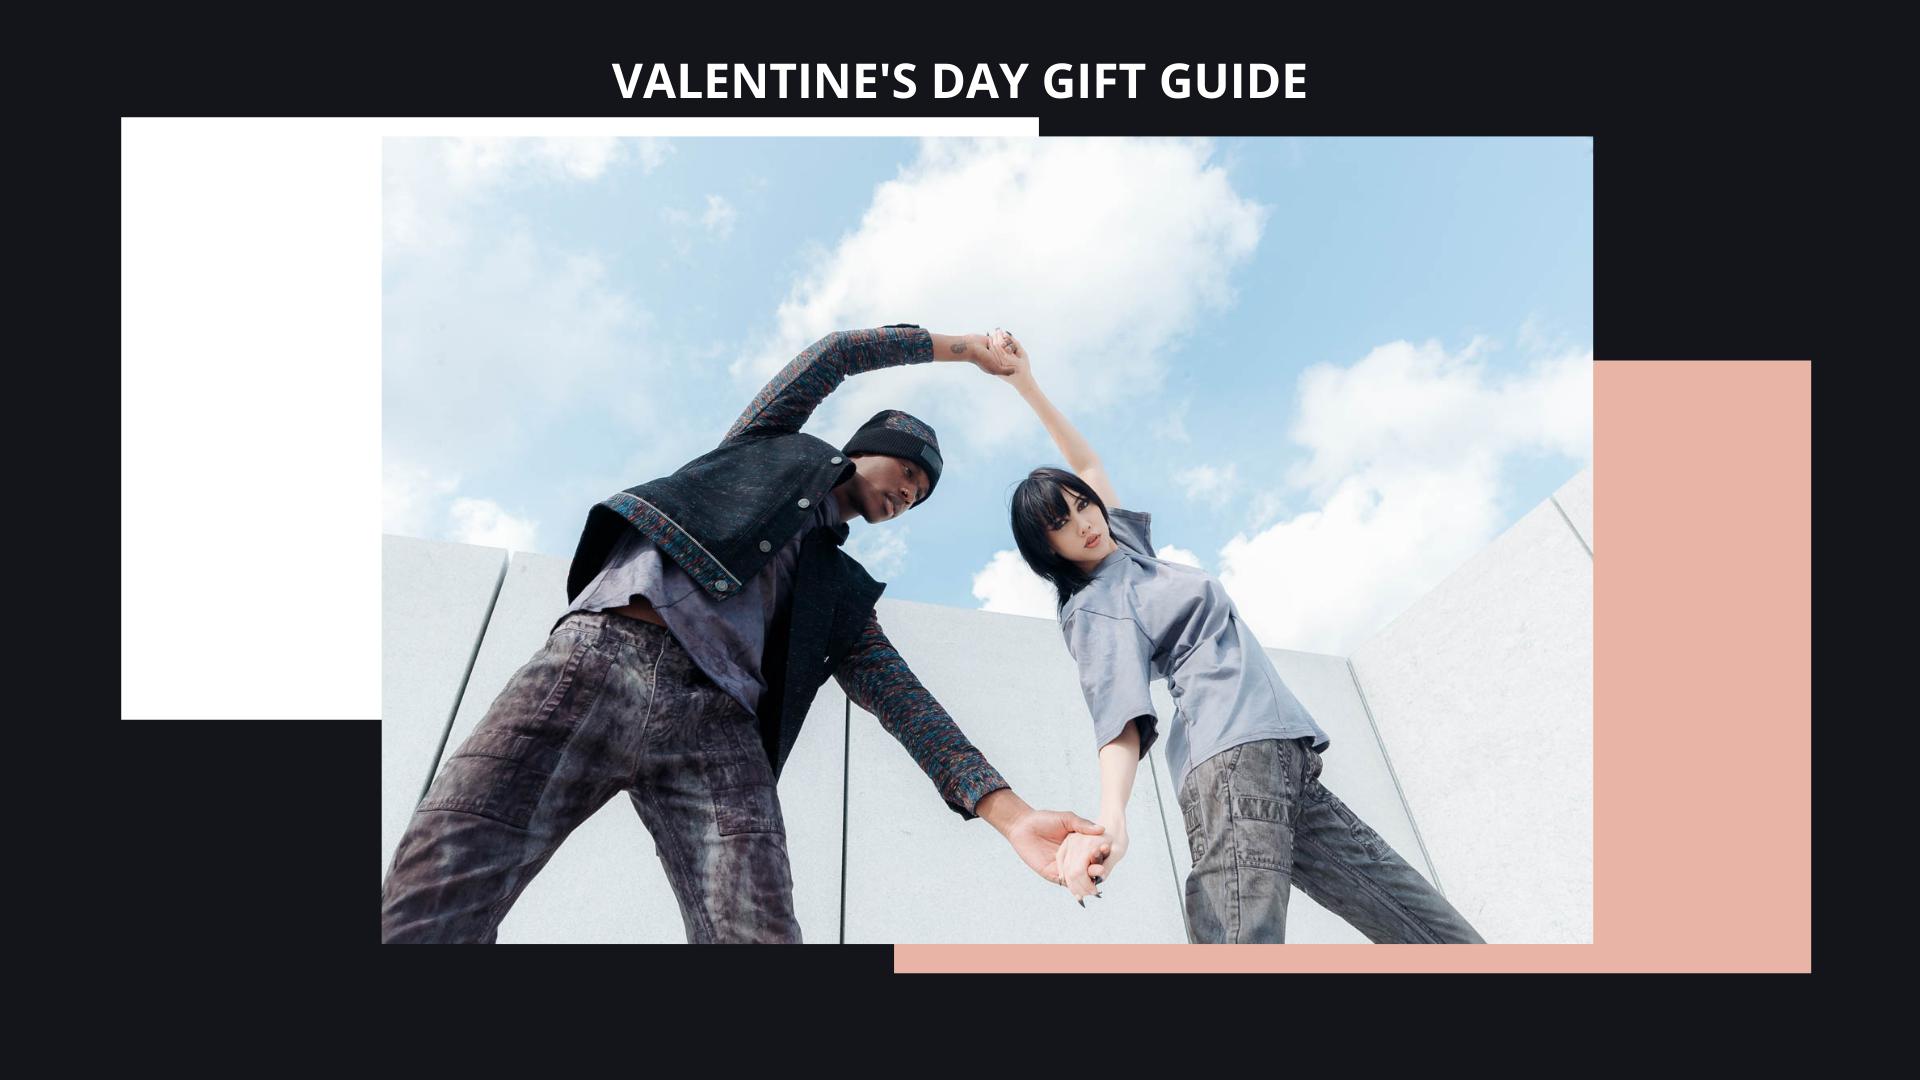 THE VALENTINES DAY GIFT GUIDE